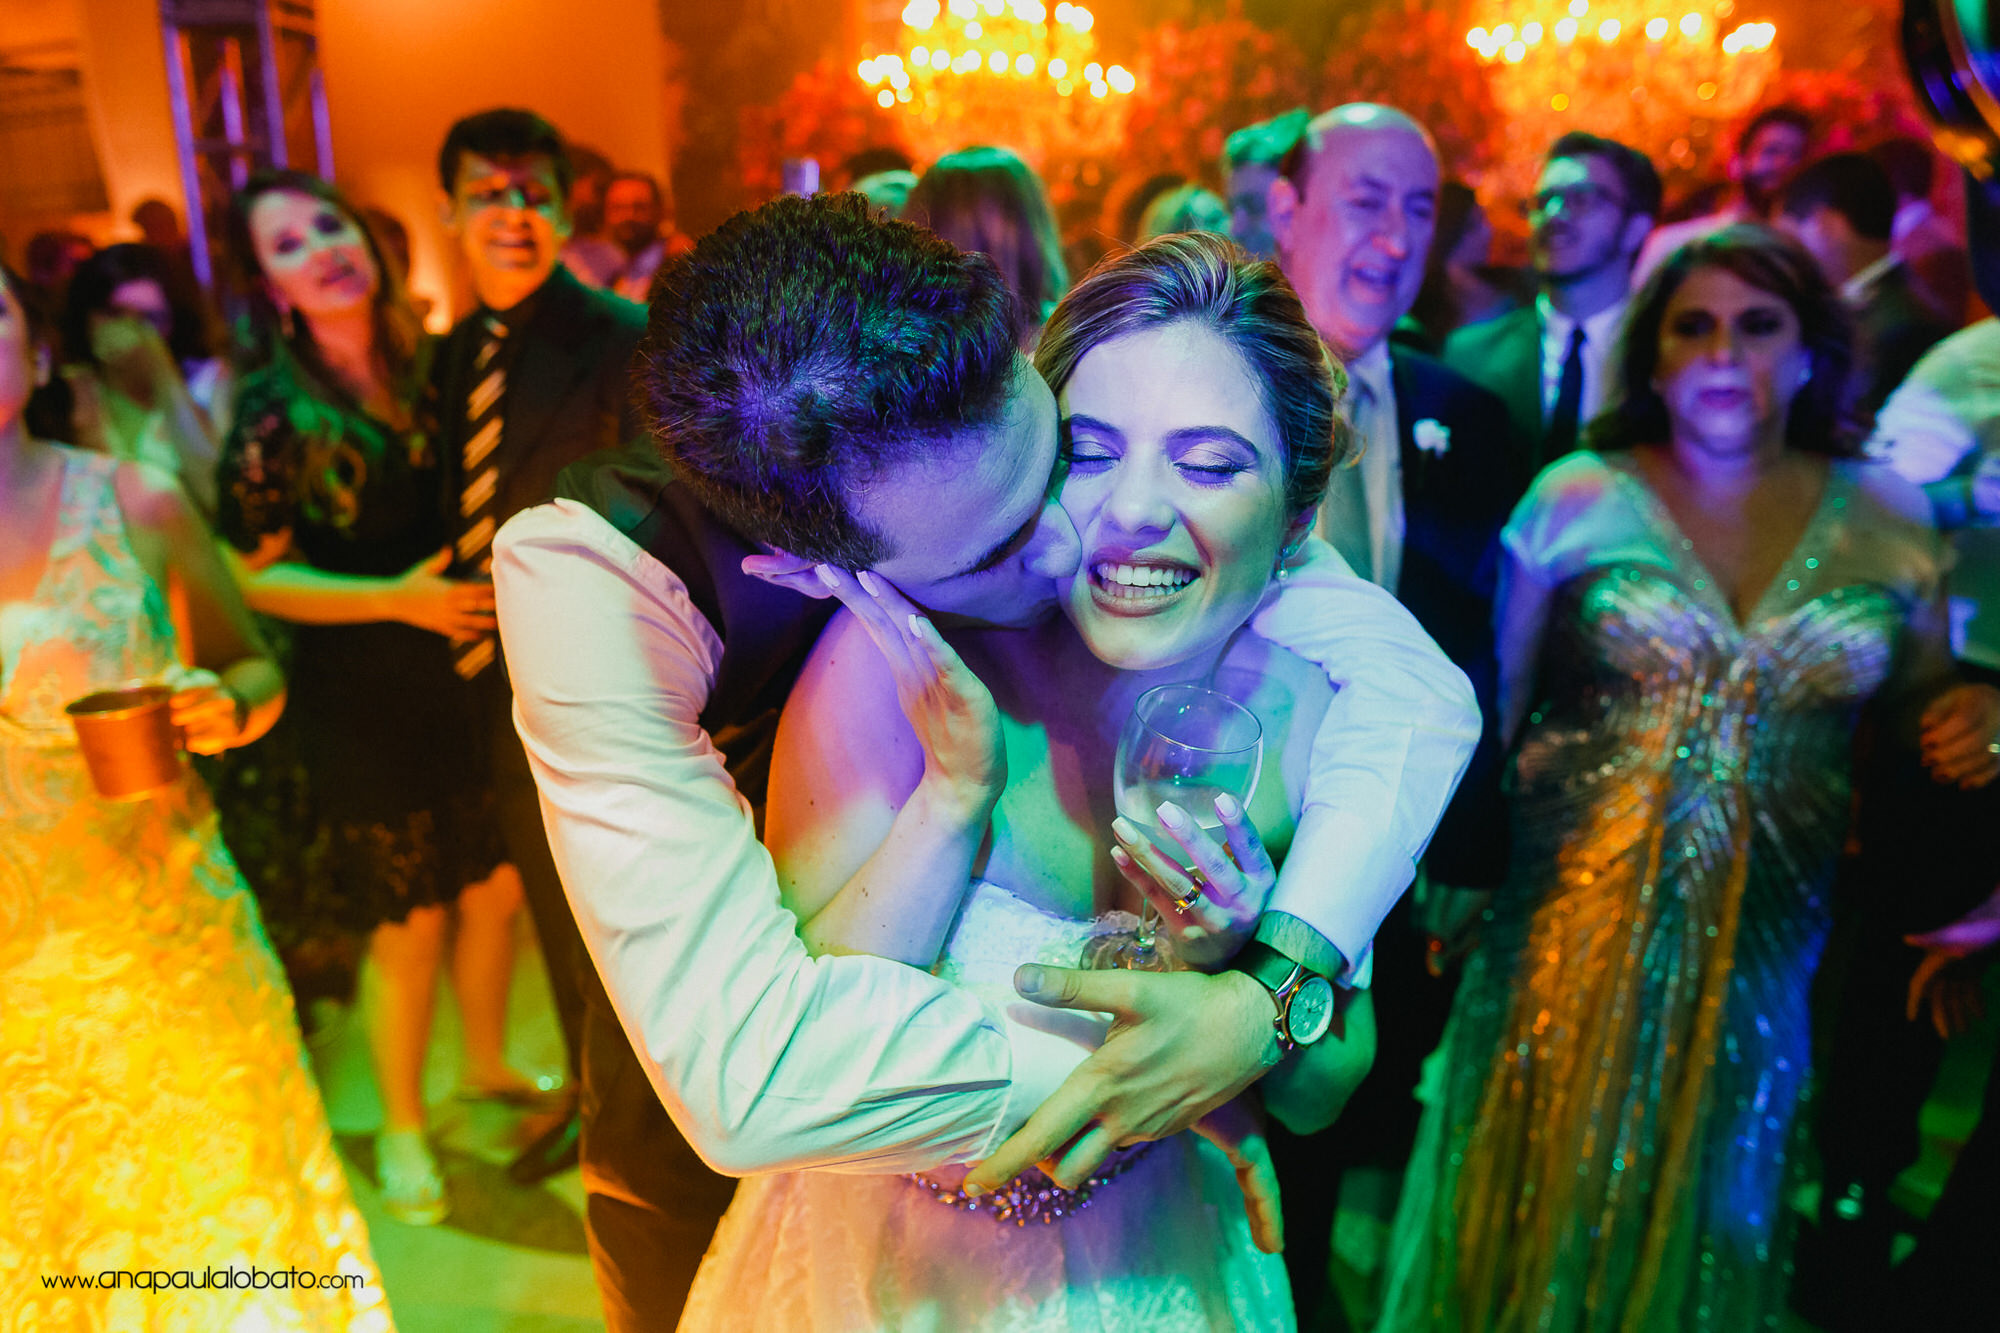 Groom hugs and kisses the bride in a colorful moment